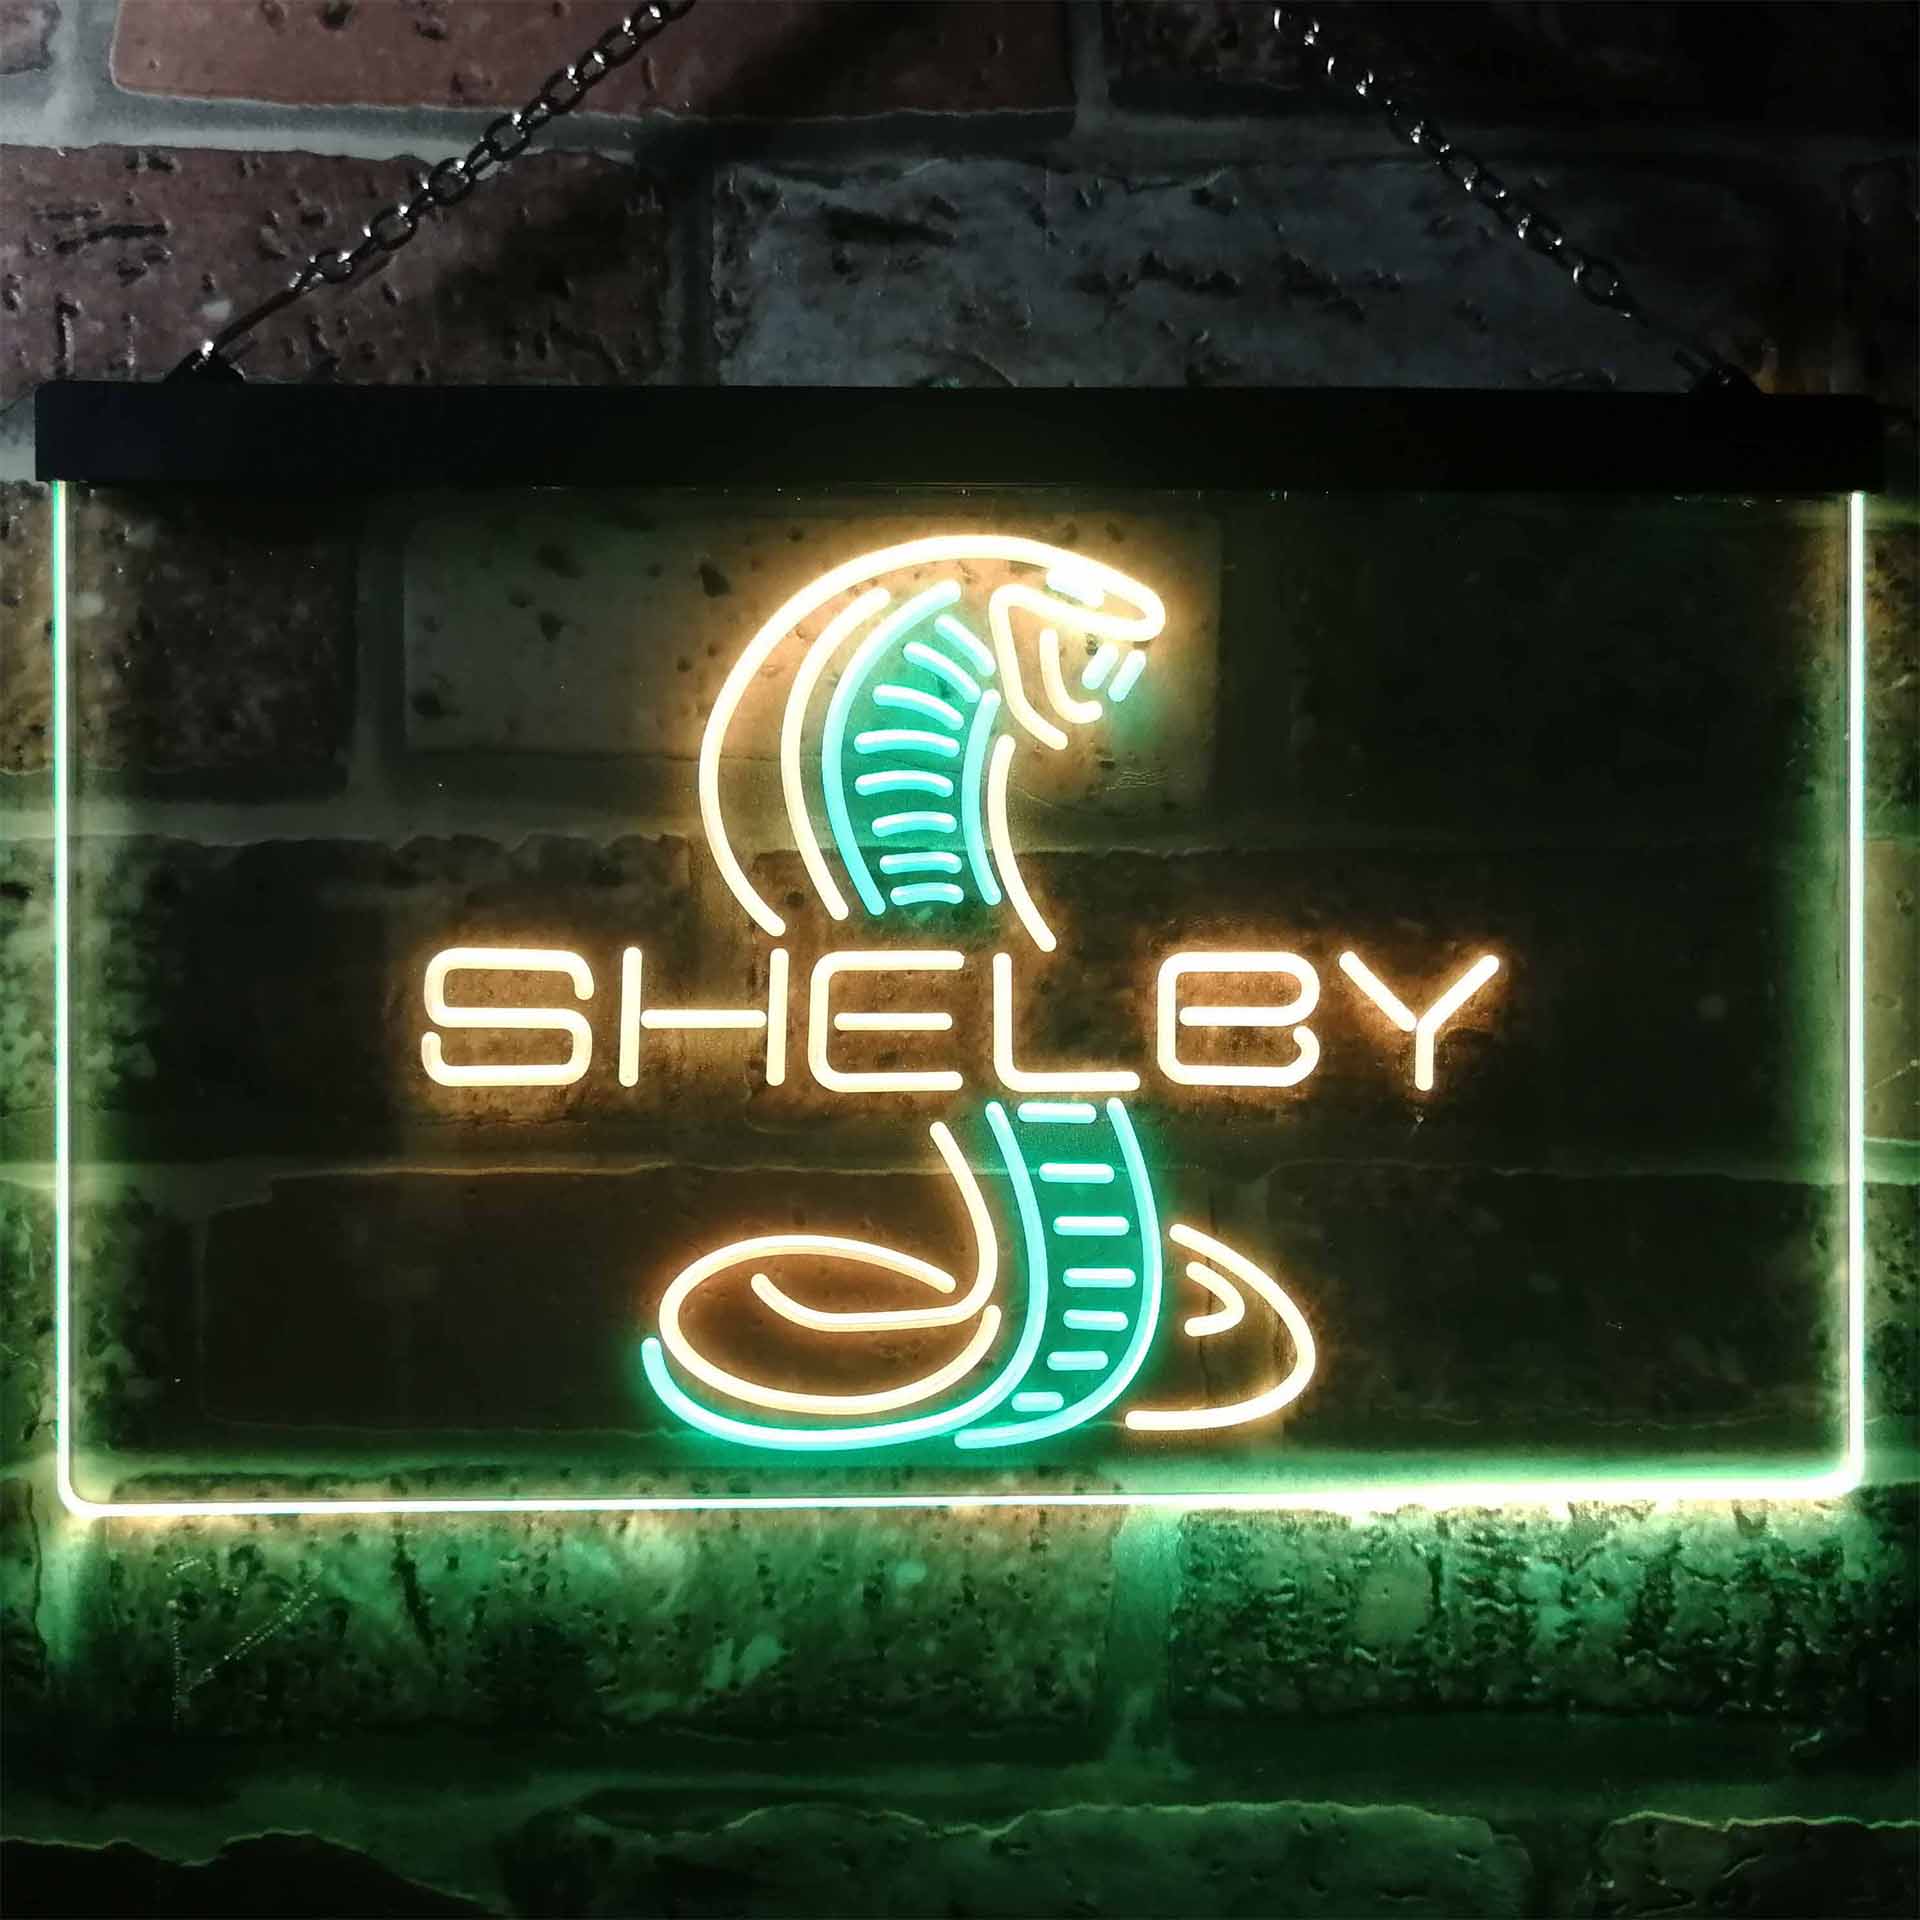 Ford Shelby Car Neon LED Sign